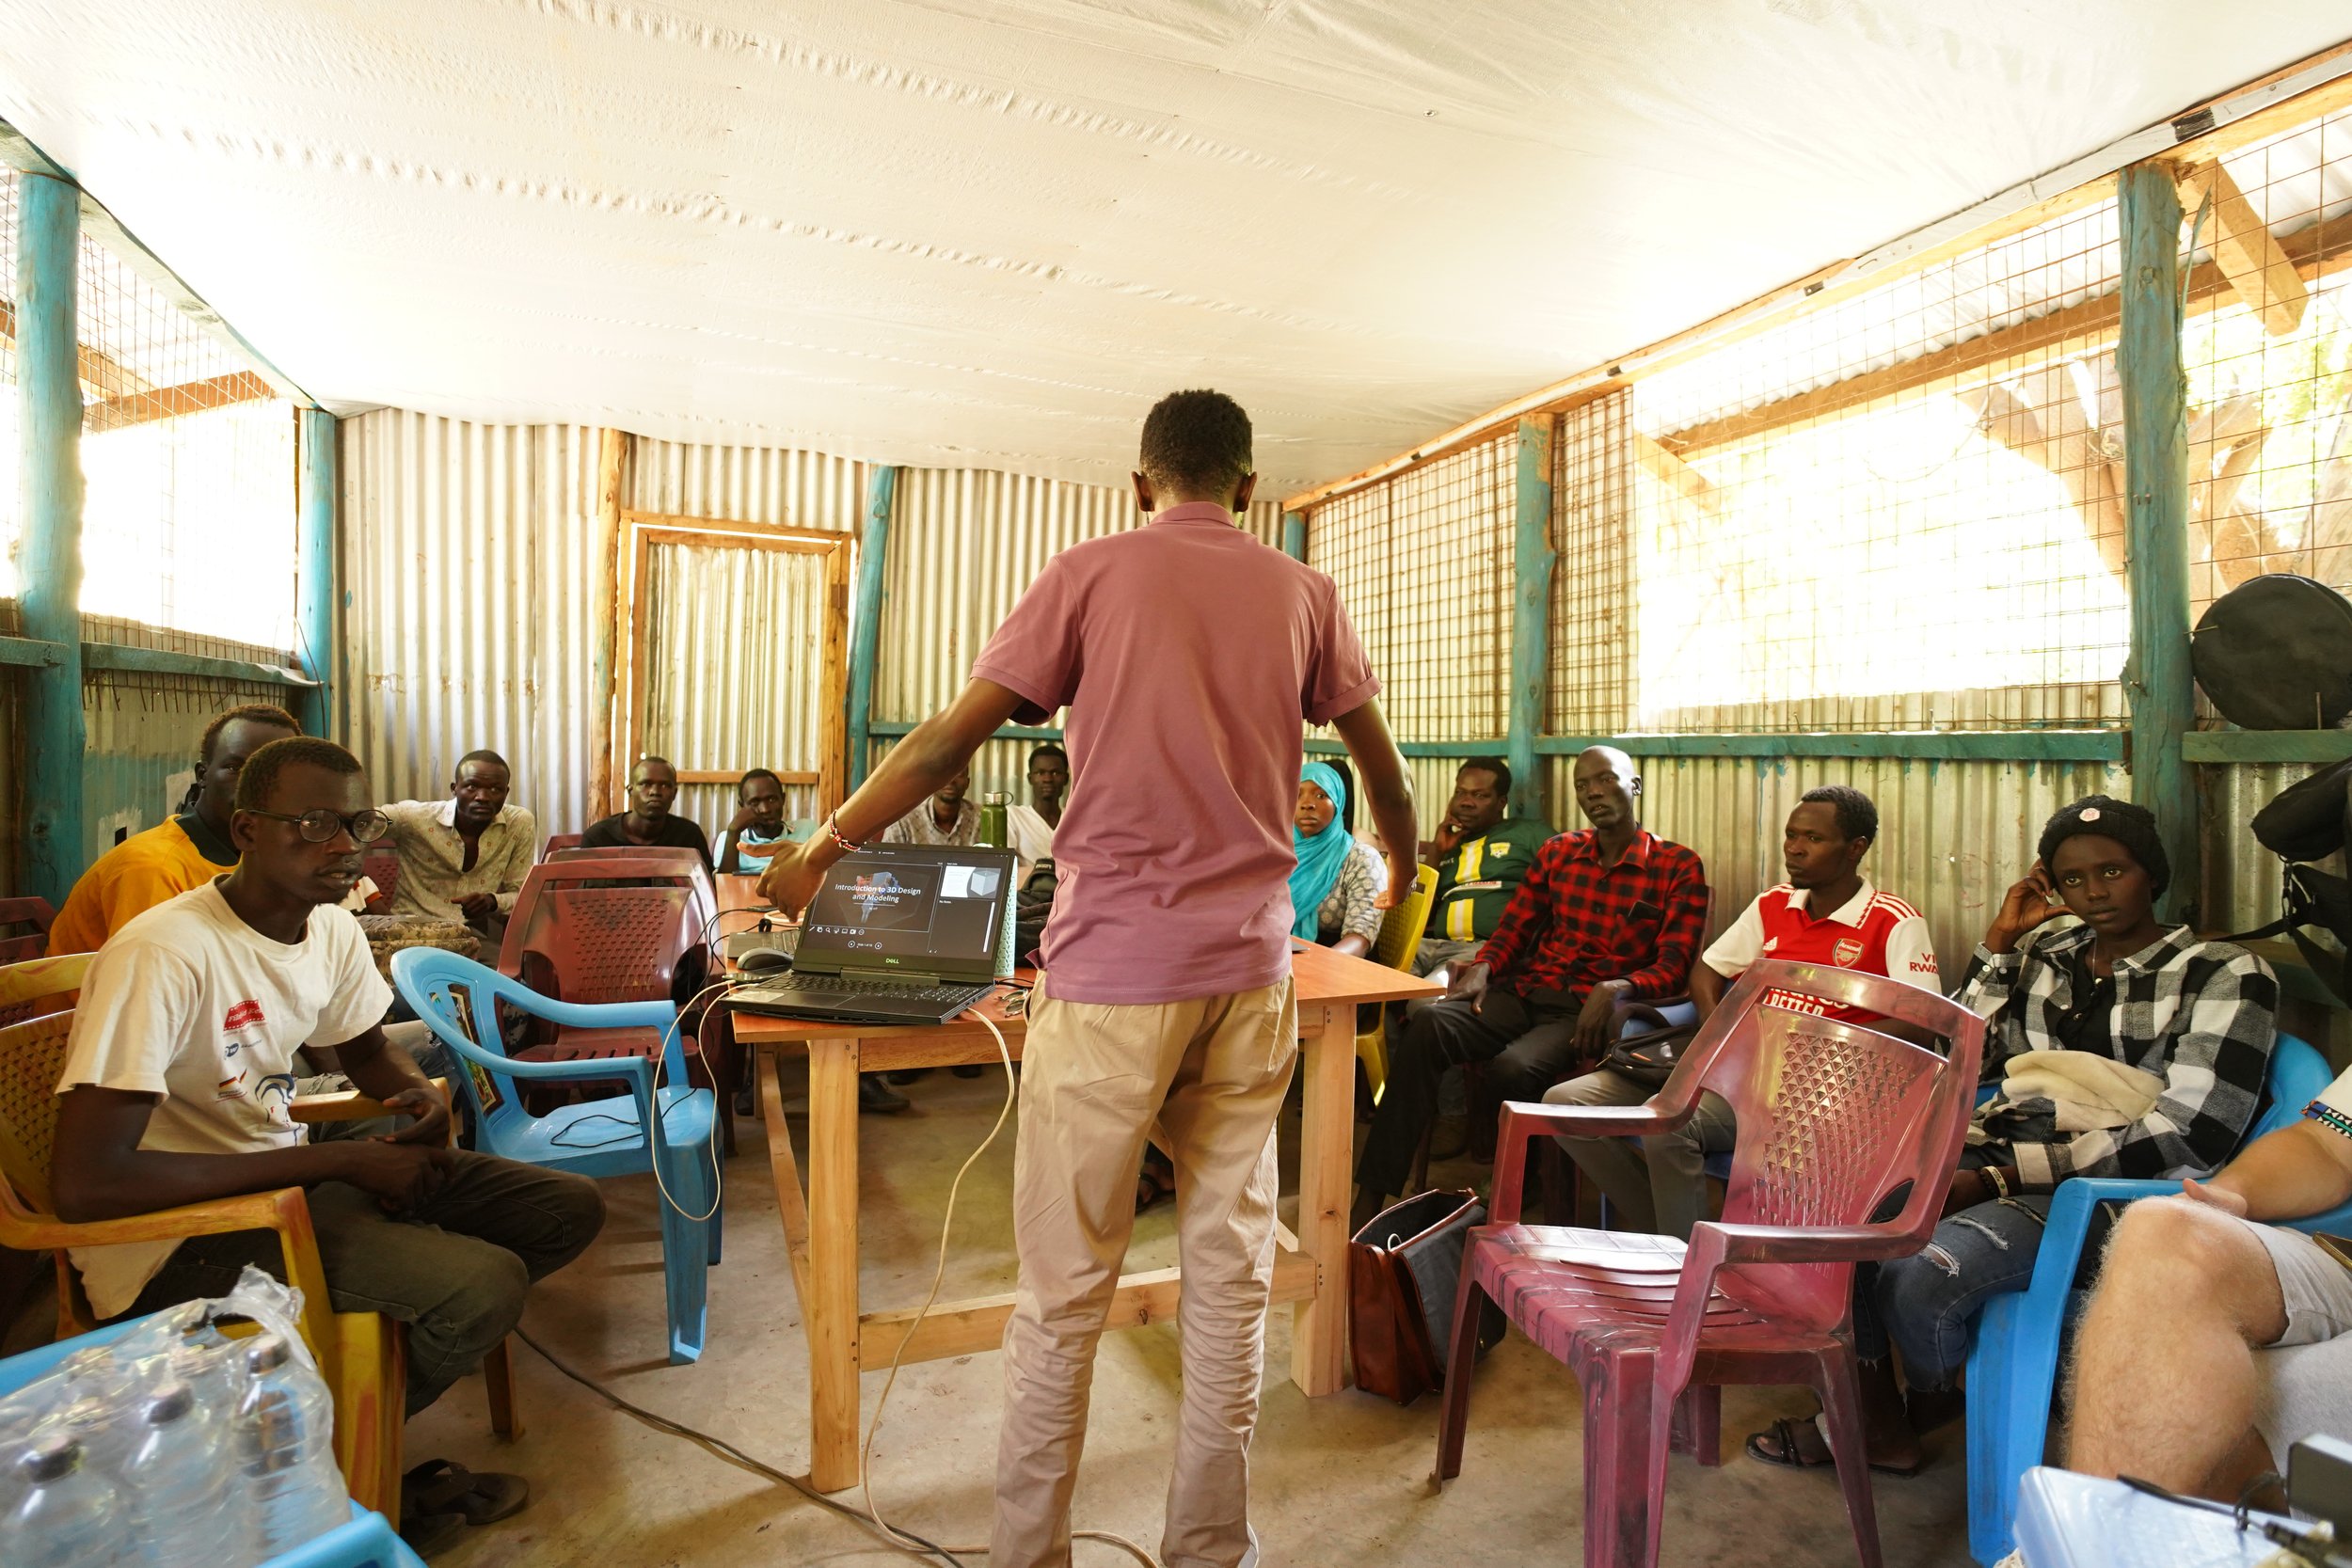 youth in Kakuma refugee camp gathered in a group learning 3d modelling in a classroom